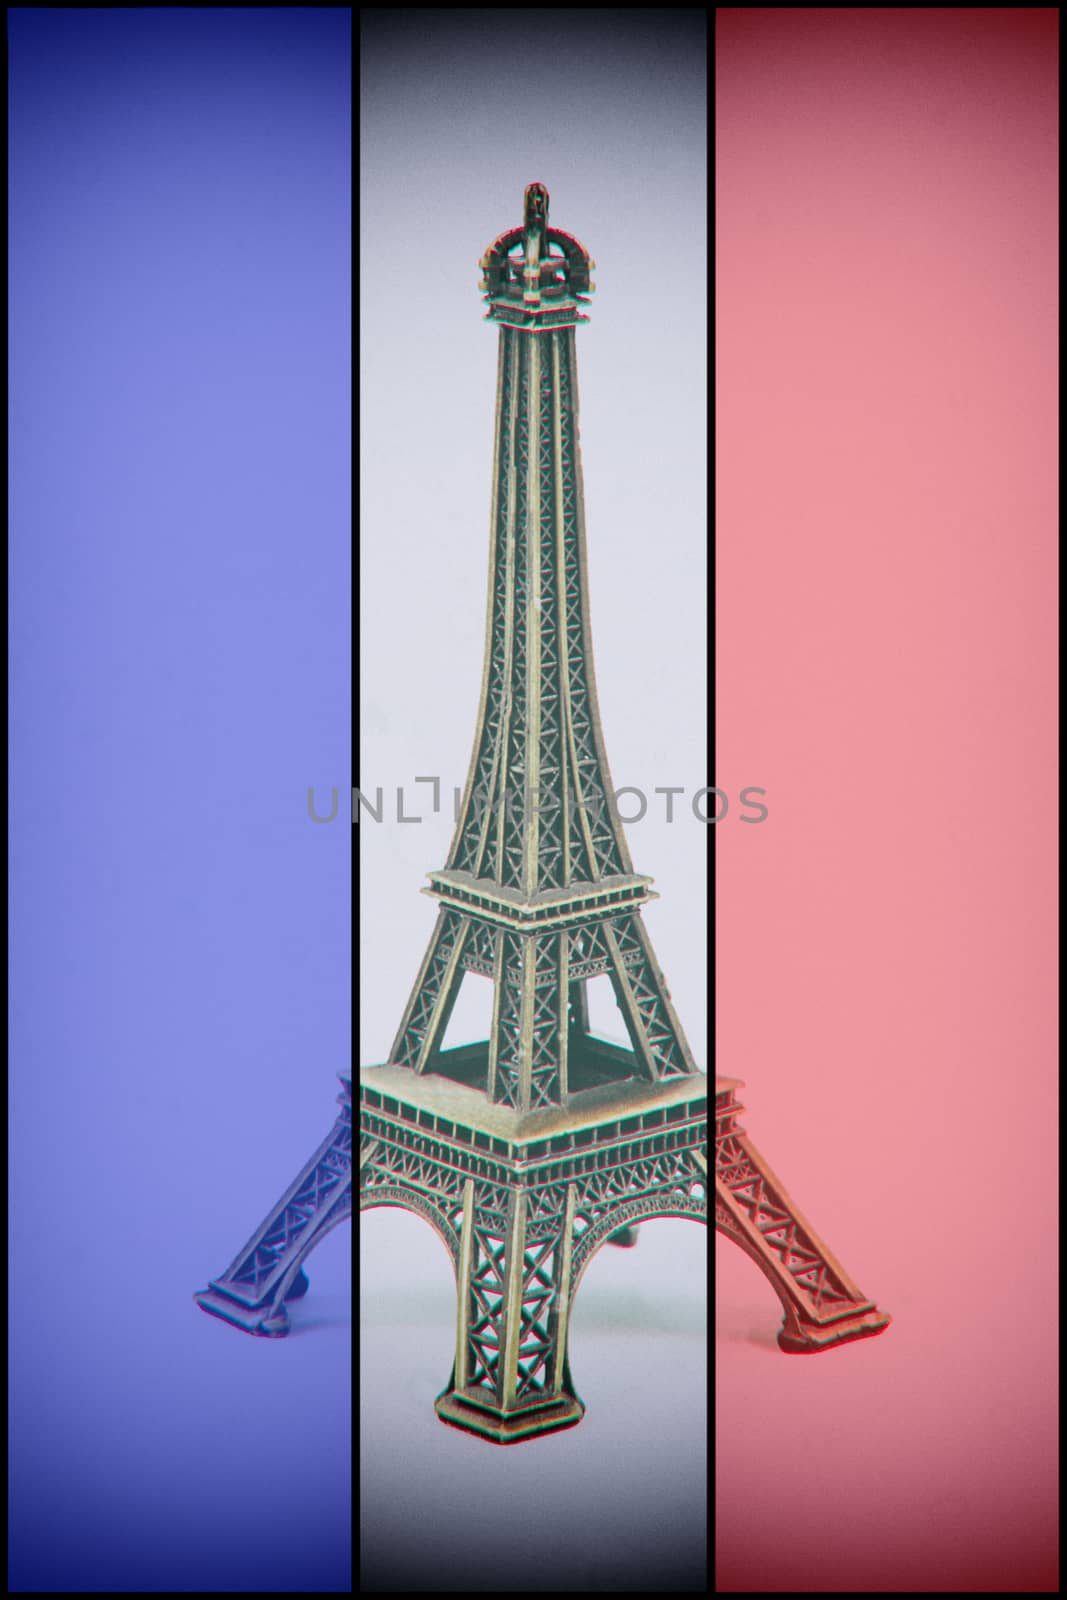 Eiffel Tower model on french flag. Dust and scratches applied for vintage analog effect